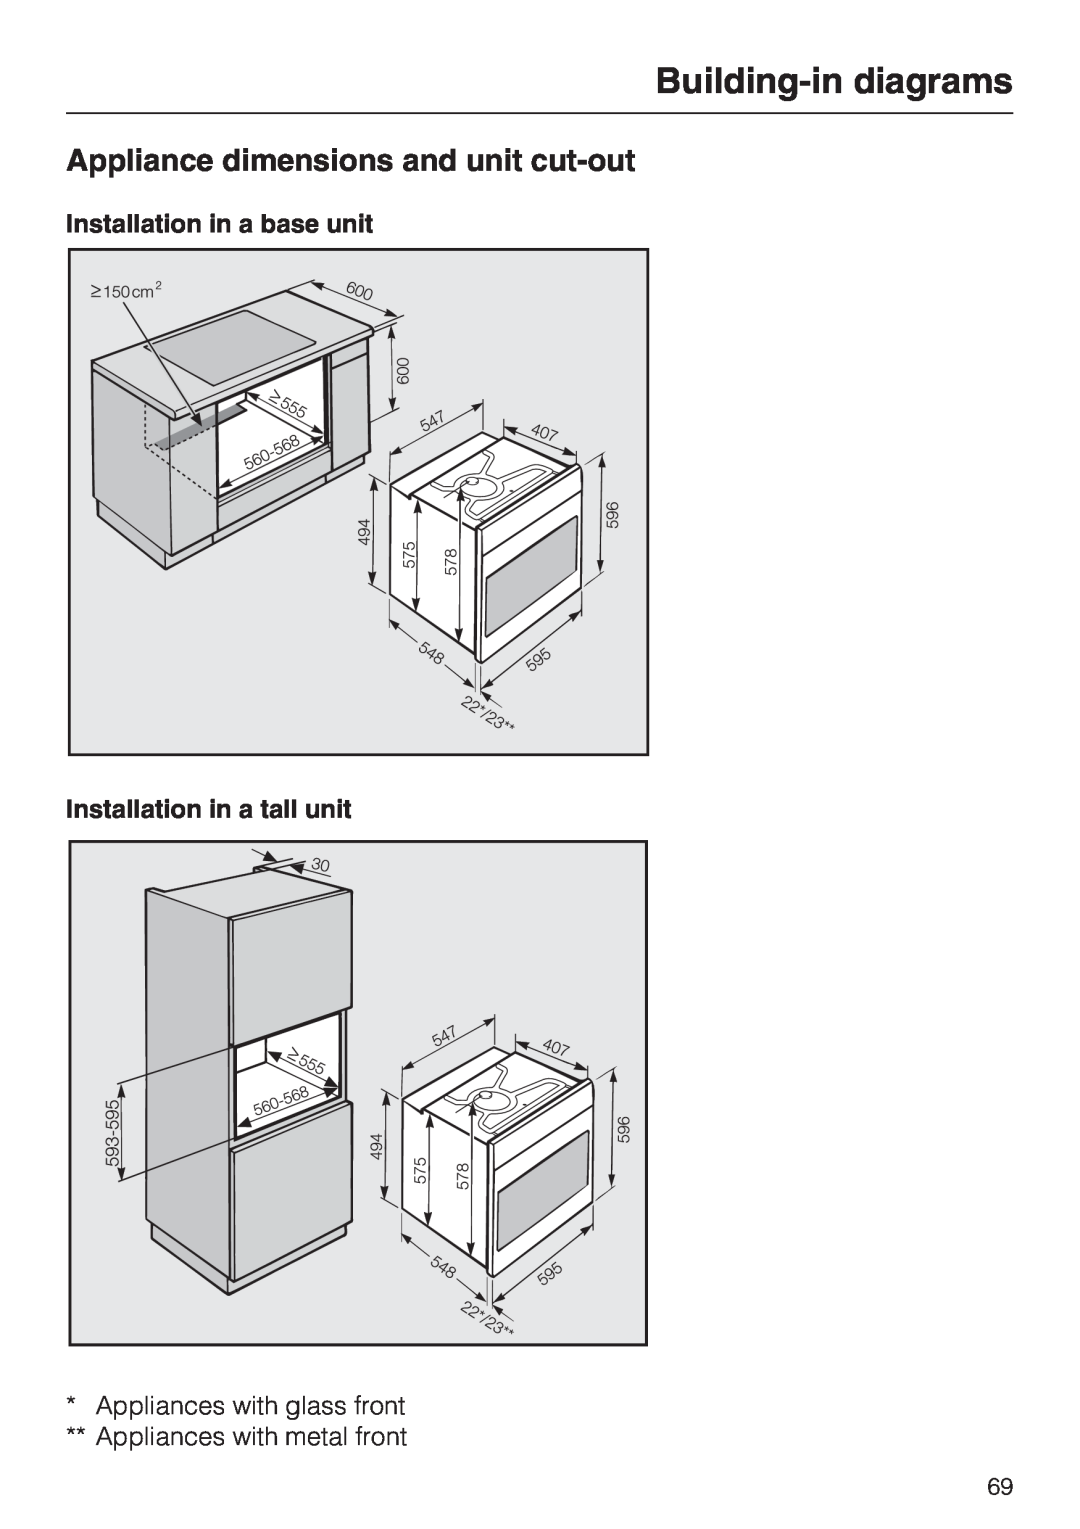 Miele H 5140 BP, H 5240 BP installation instructions Building-in diagrams, Appliance dimensions and unit cut-out 